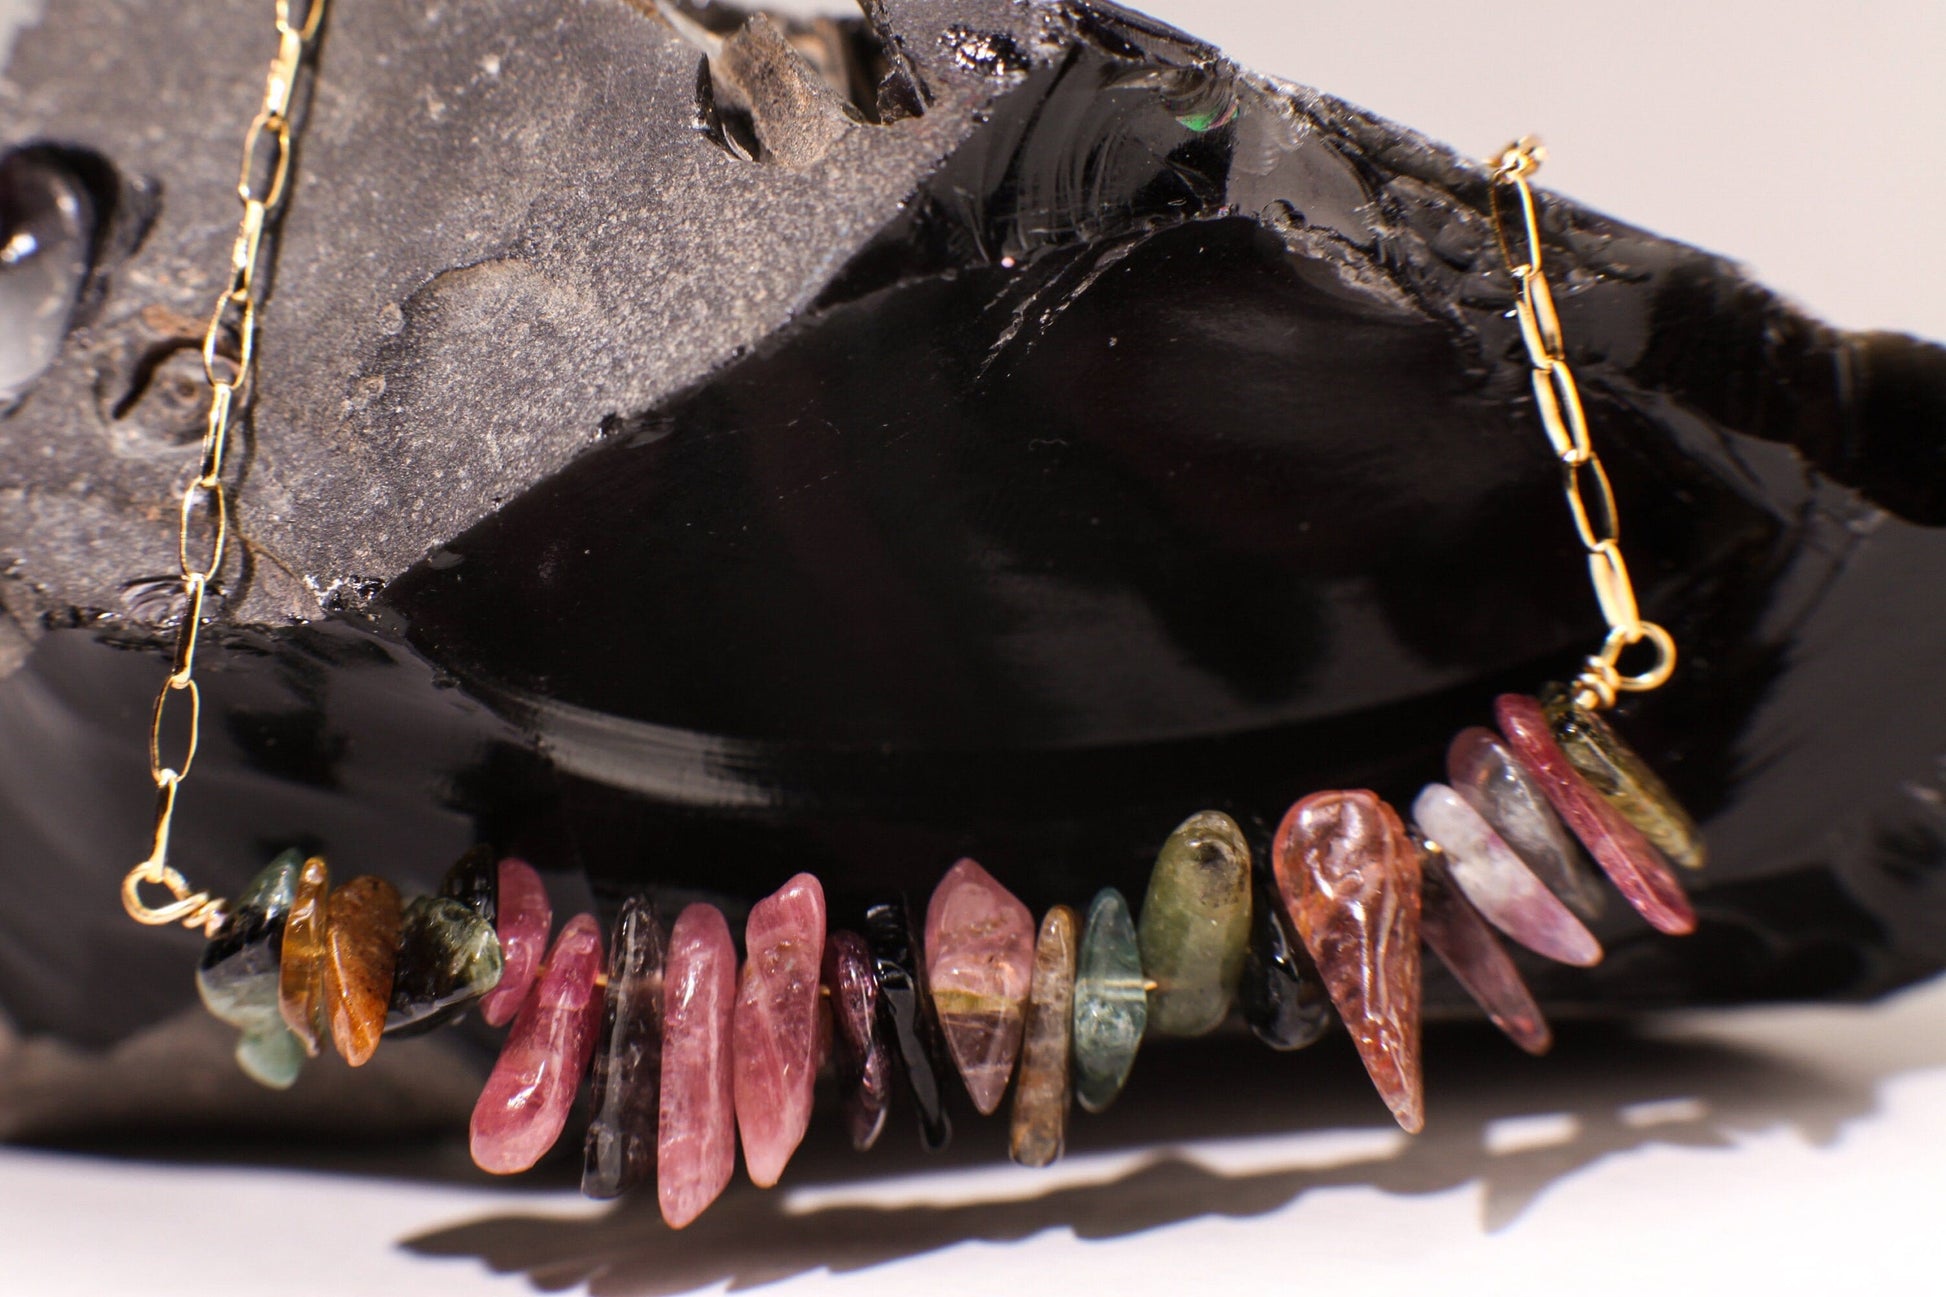 Watermelon Tourmaline 5-13mm Raw Freeform Chips, 14K Gold Filled, 925 Sterling Silver Bar Necklace,Healing Crystal,Chakra,October Birthstone